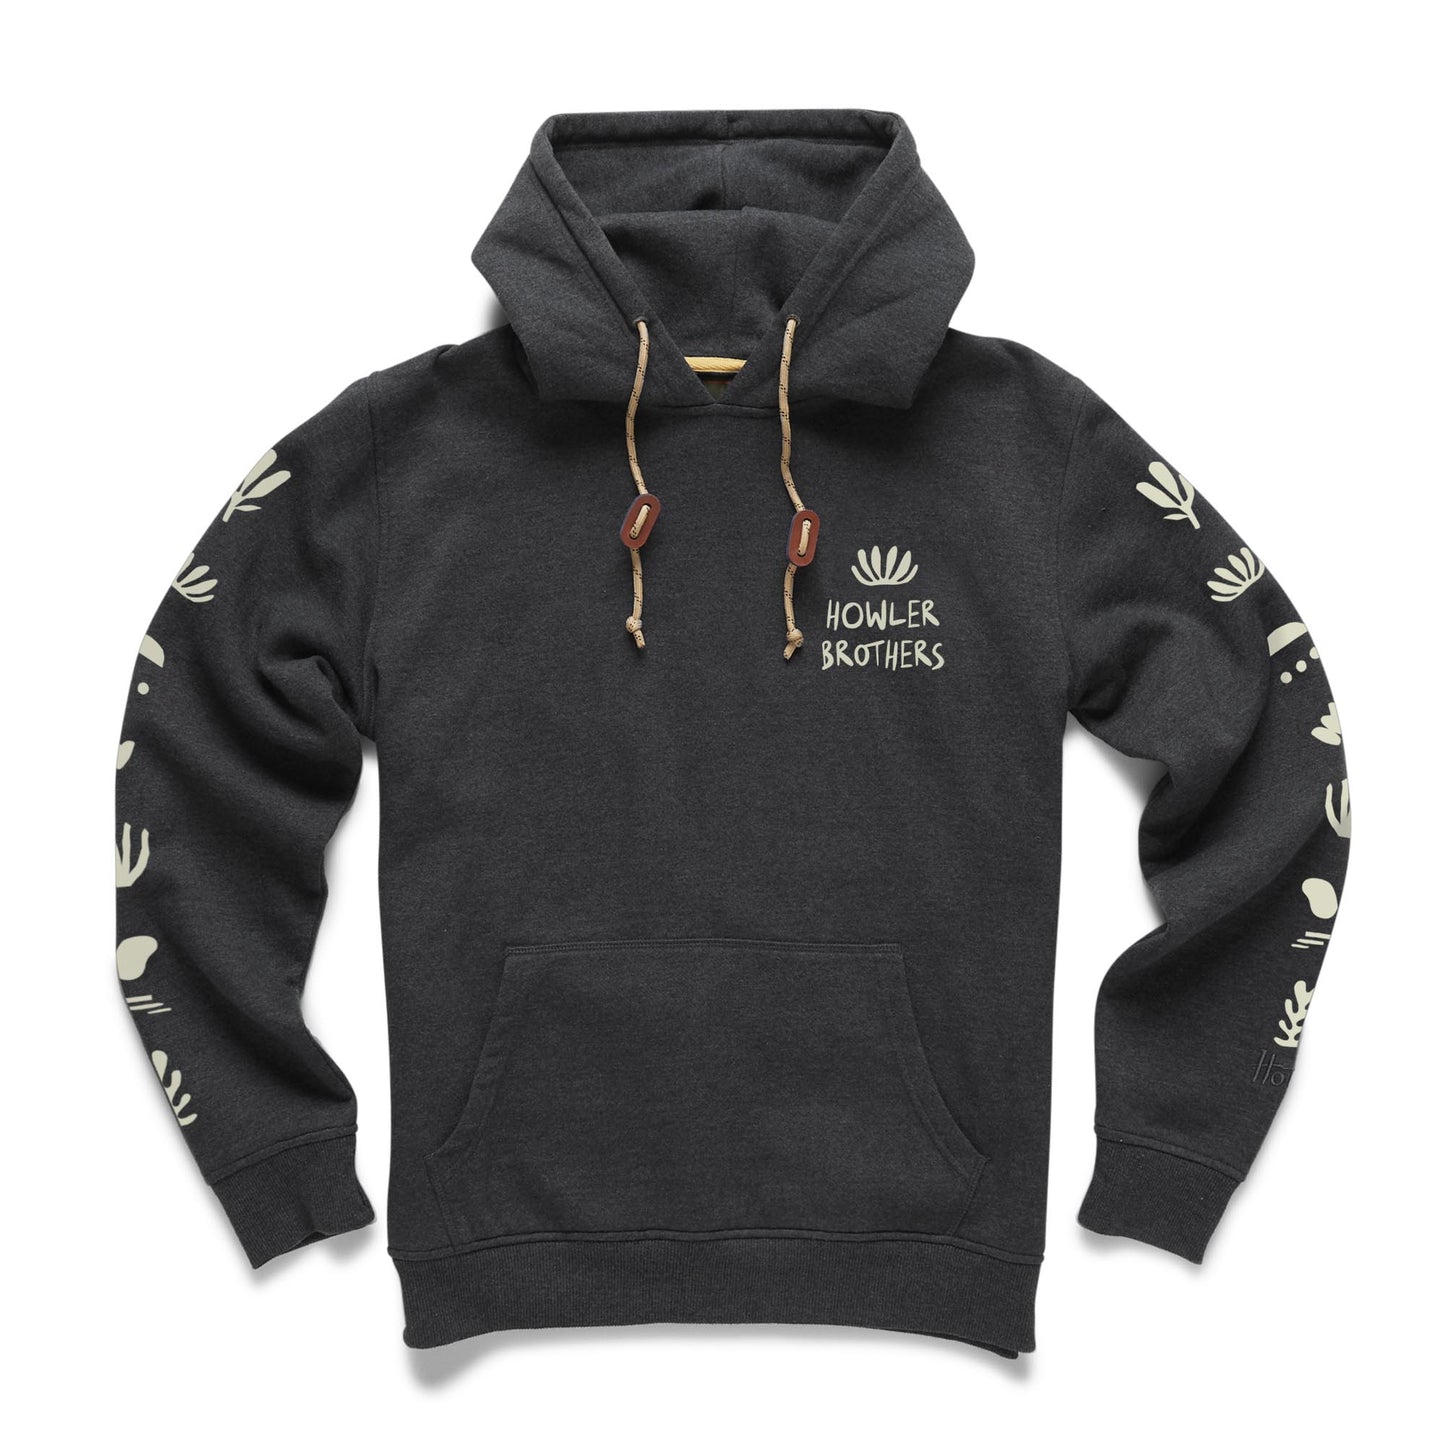 Howler Brothers Pullover Hoodie - Charcoal Heather